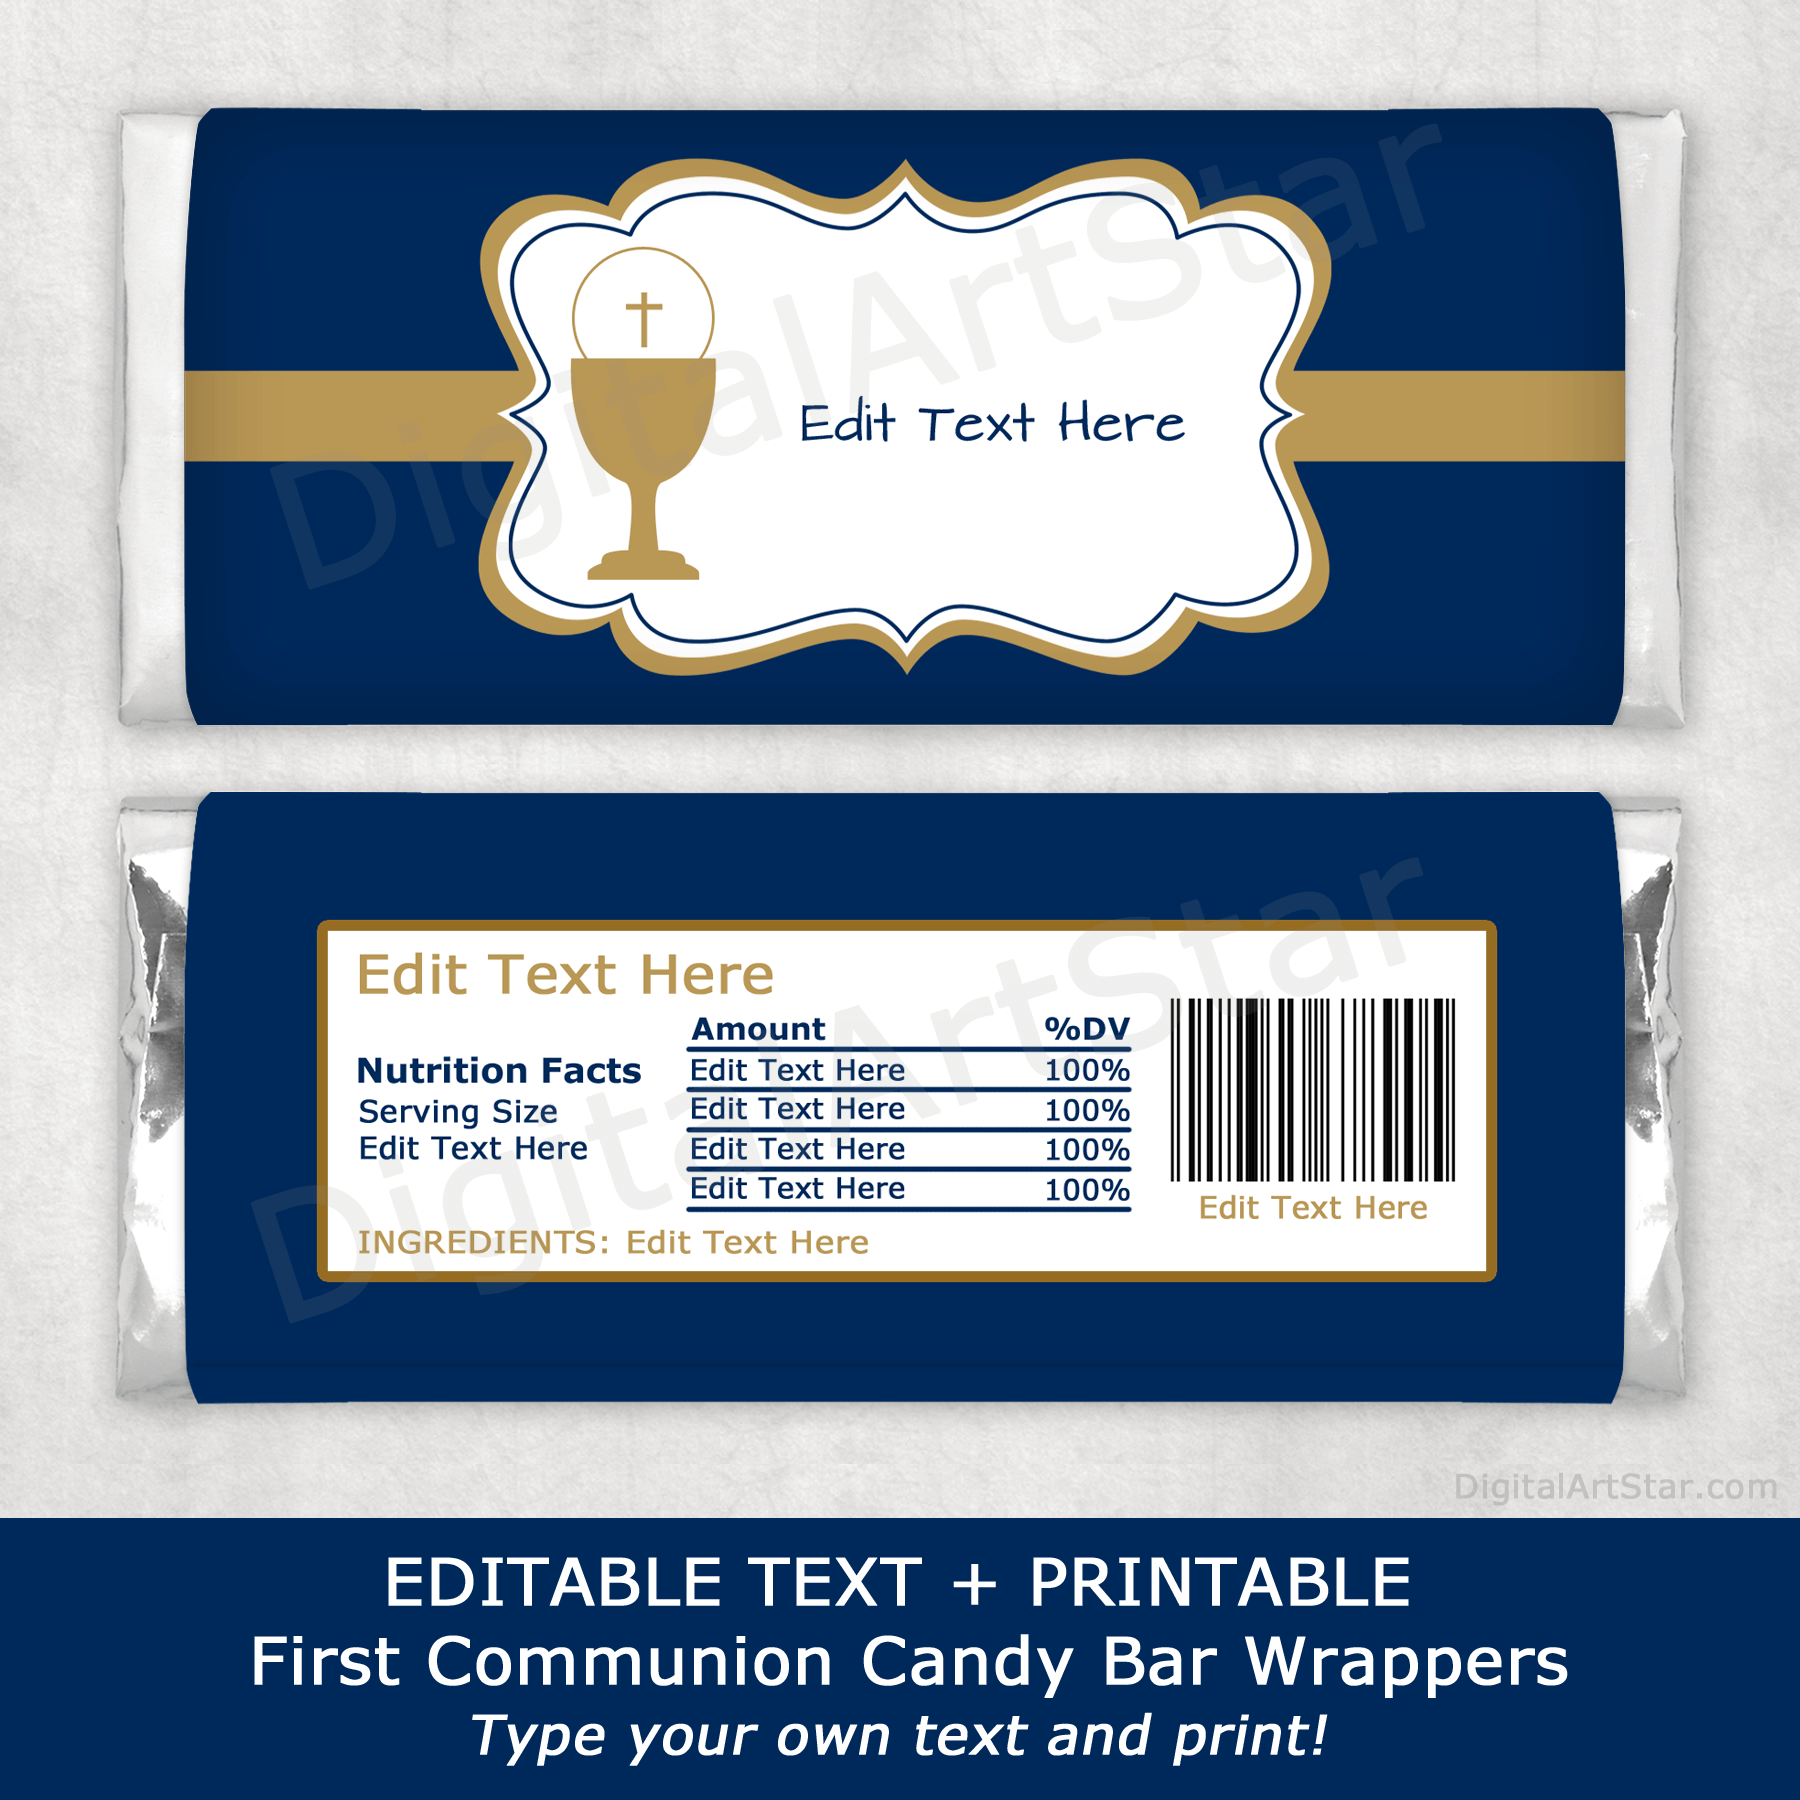 First Communion Boy Candy Bar Wrappers in Navy Blue and Gold